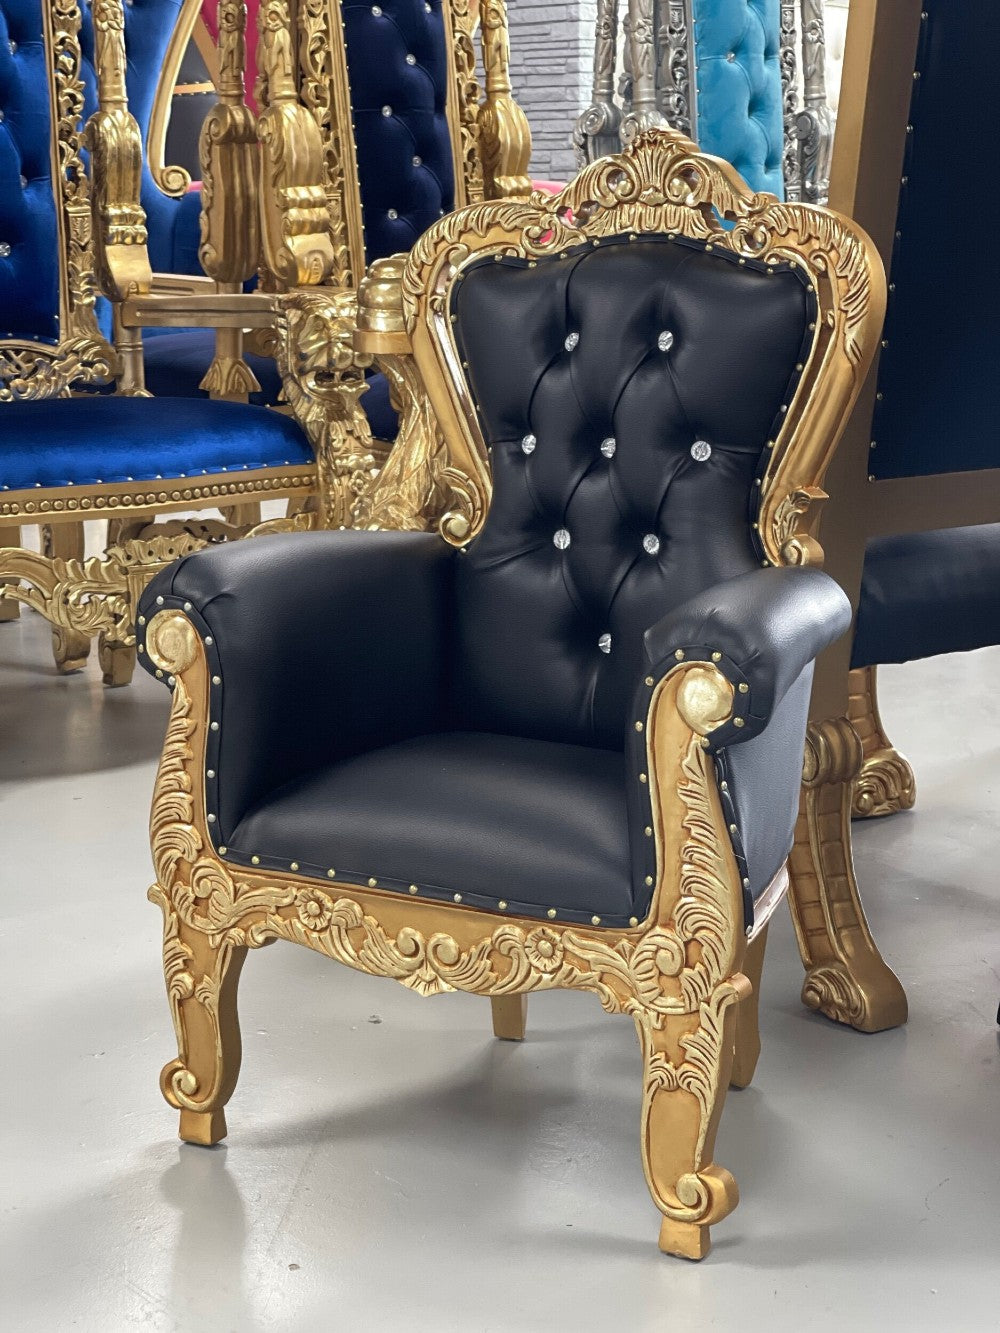 Toddler Black and Gold Throne Chair